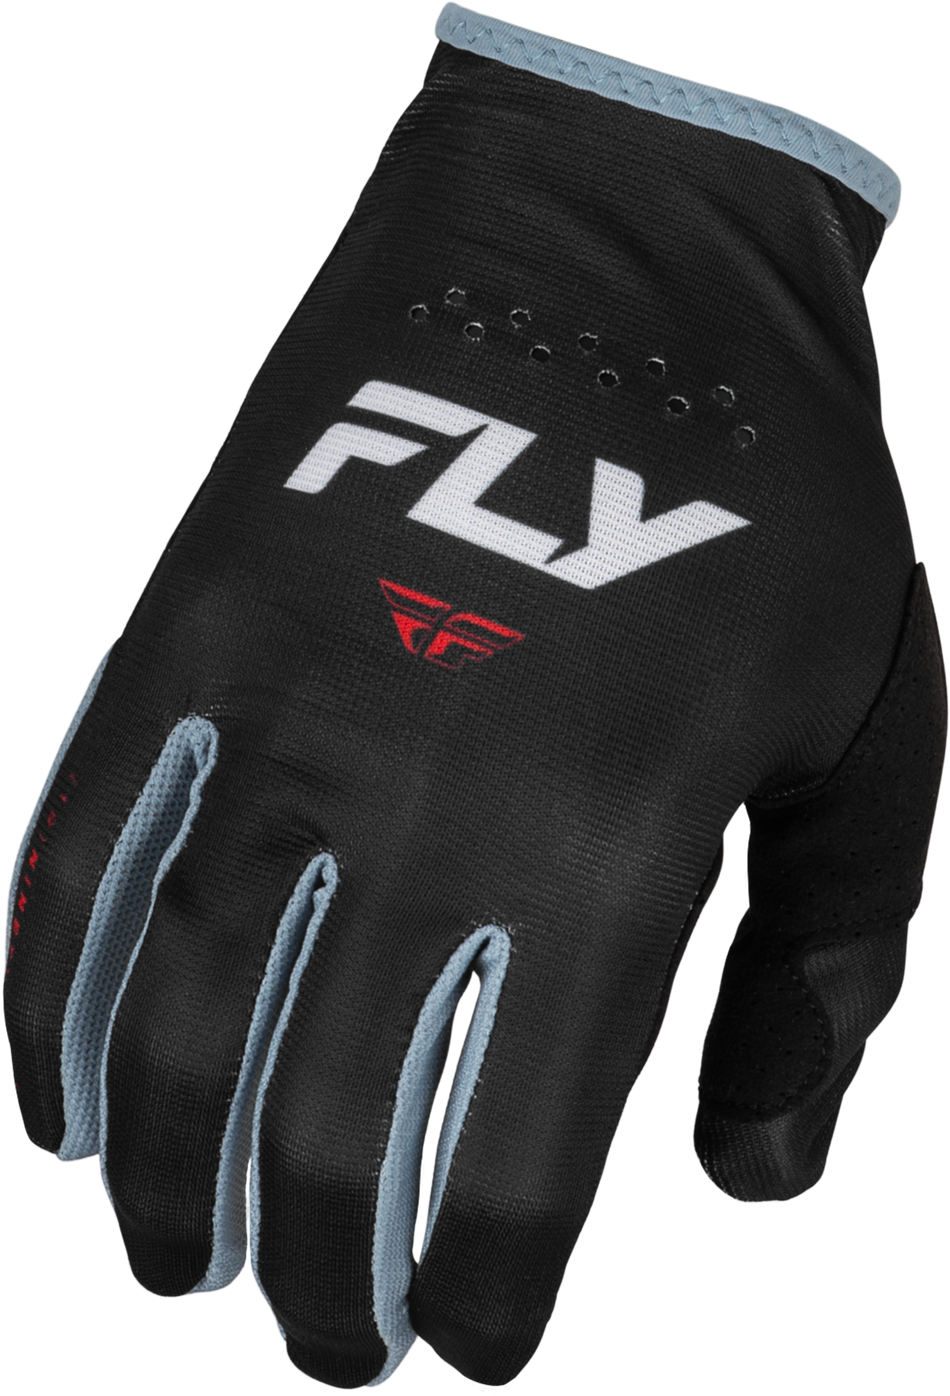 FLY RACING Youth Lite Gloves Black/White/Red Yl 377-710YL